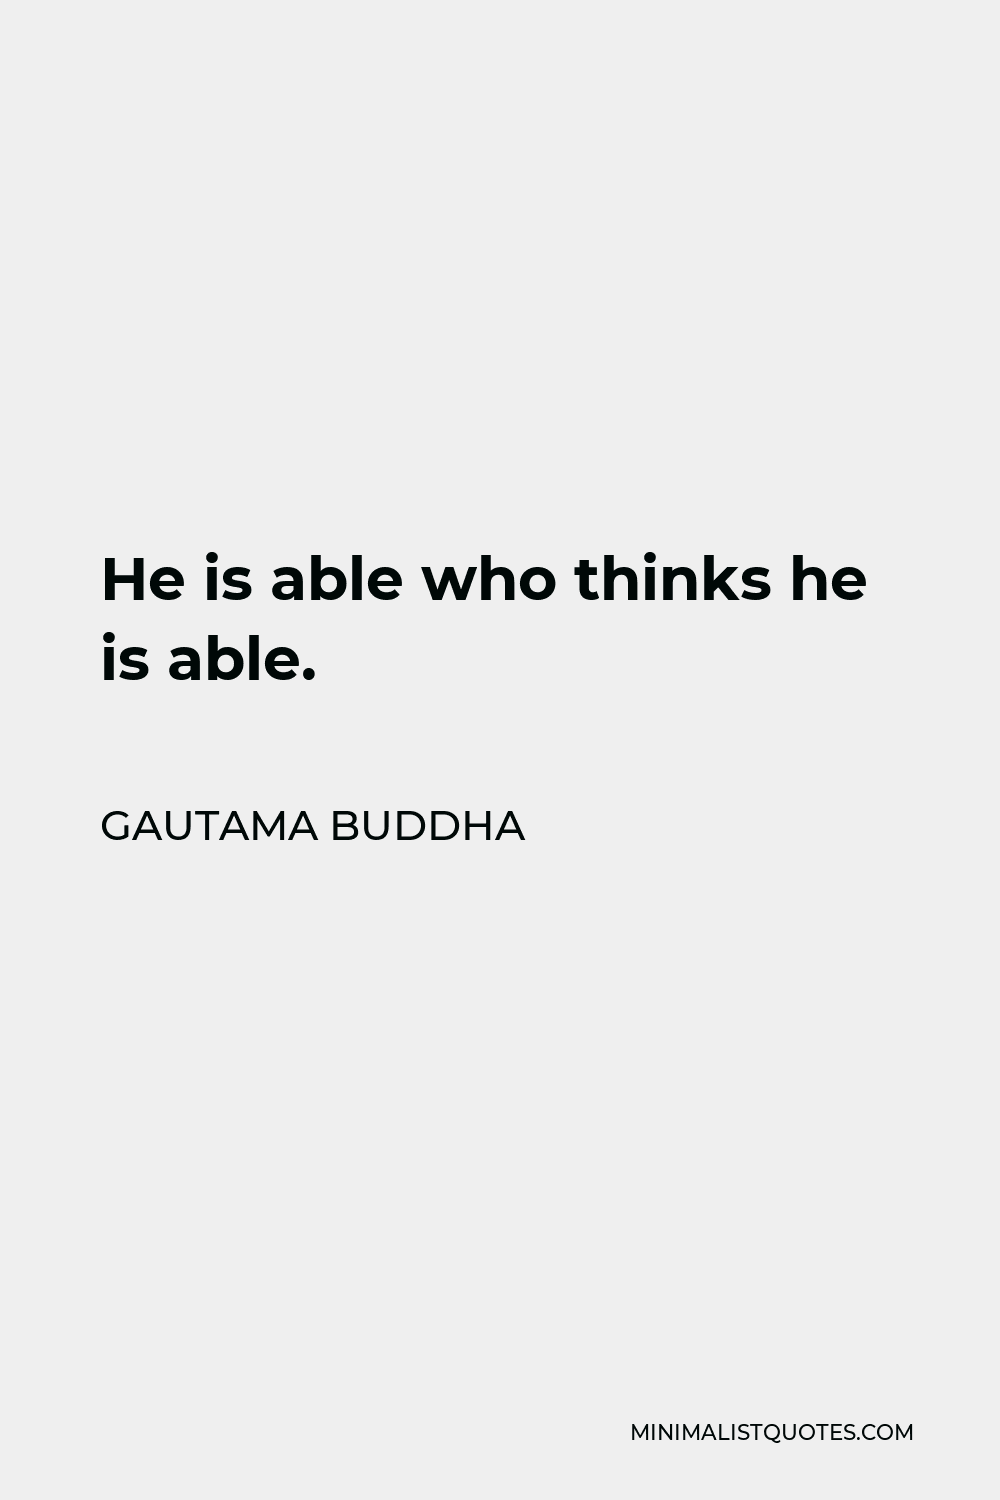 Gautama Buddha Quote - He is able who thinks he is able.